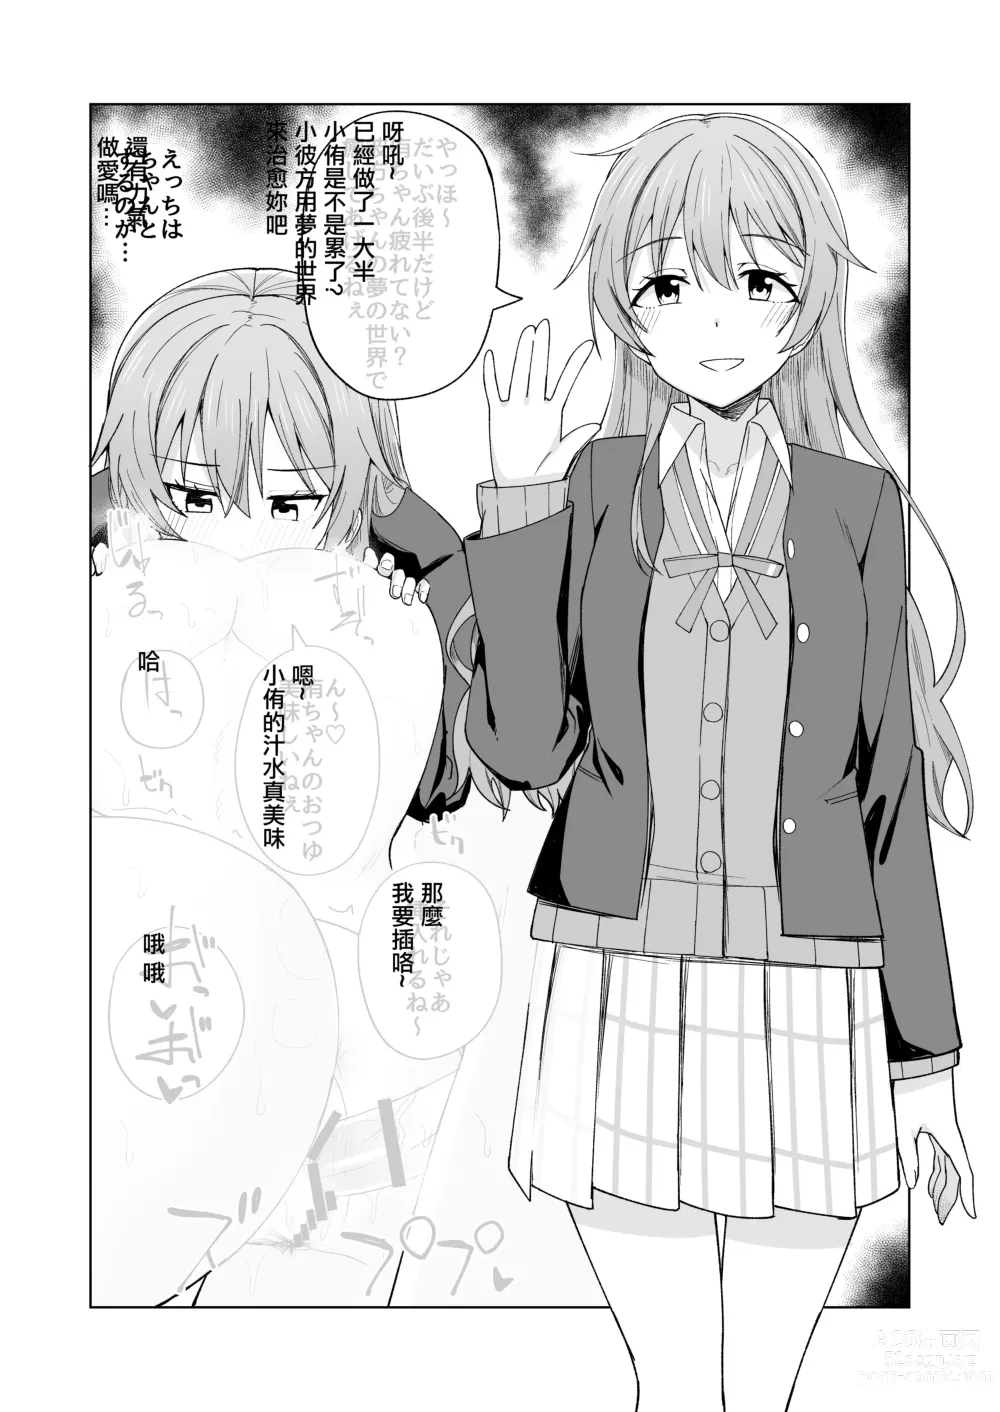 Page 25 of doujinshi 誕生的悸動